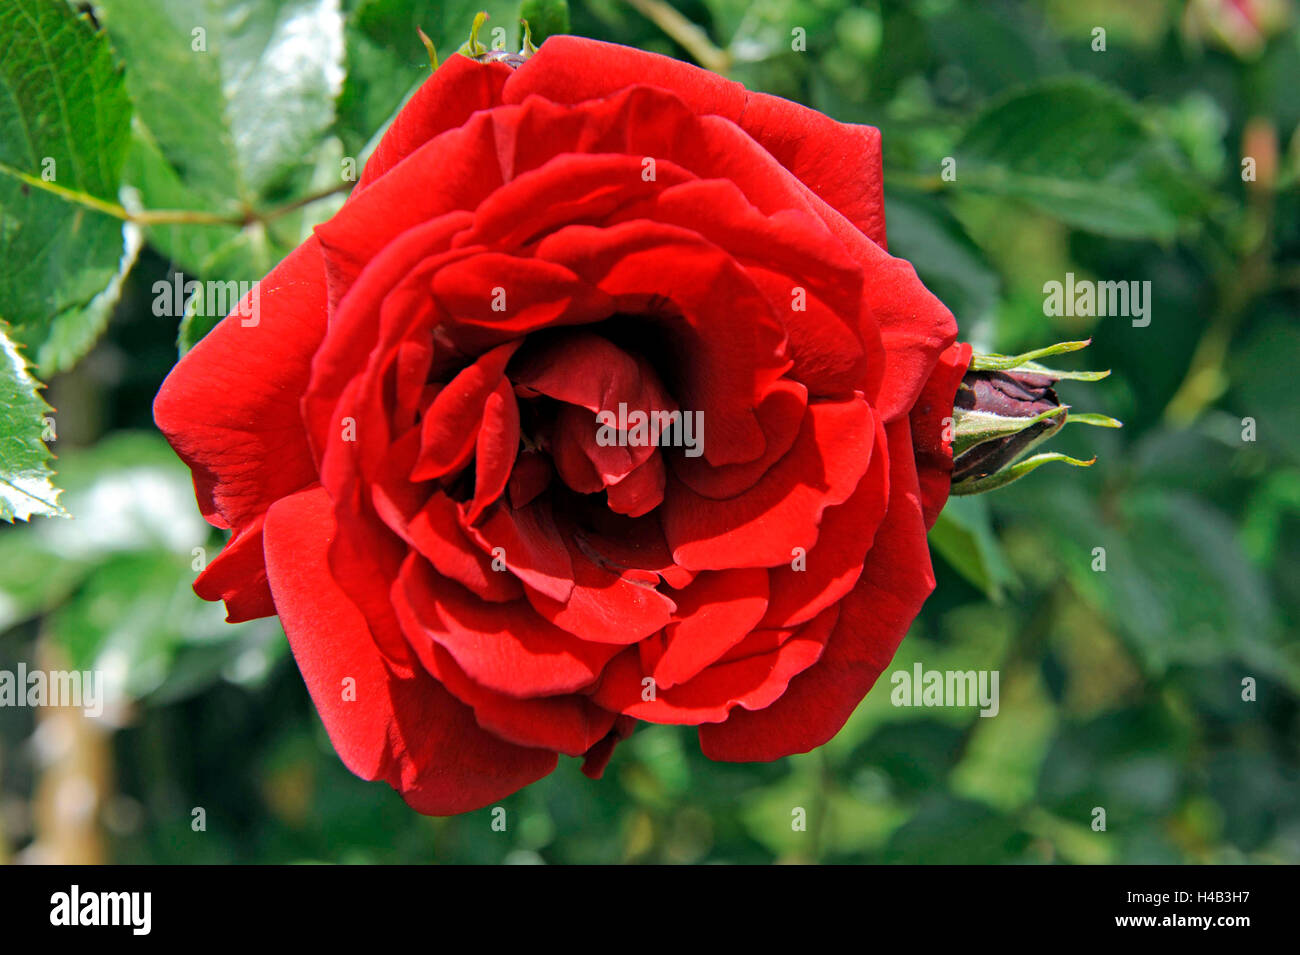 Dark red climbing rose, Rosa 'Sympathie, blossom, early summer till late autumn, with climbing help, garden Stock Photo